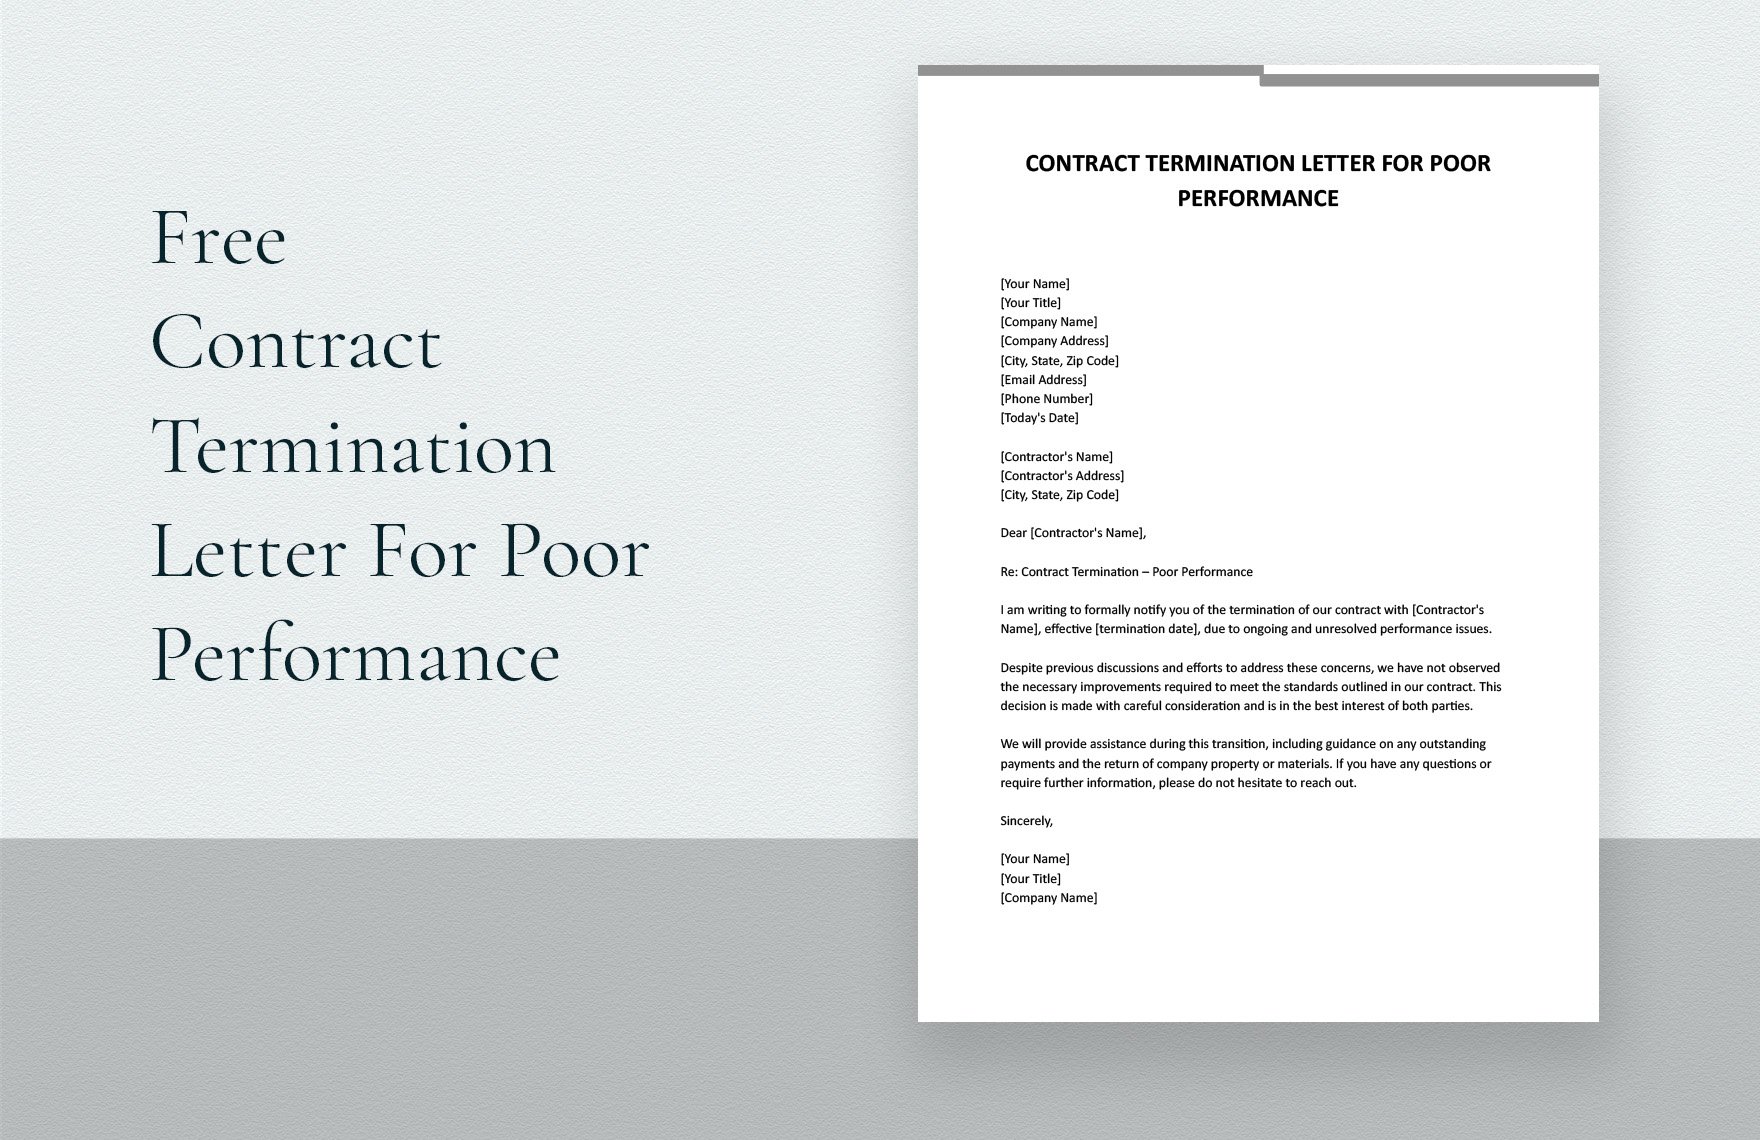 contract-termination-letter-for-poor-performance